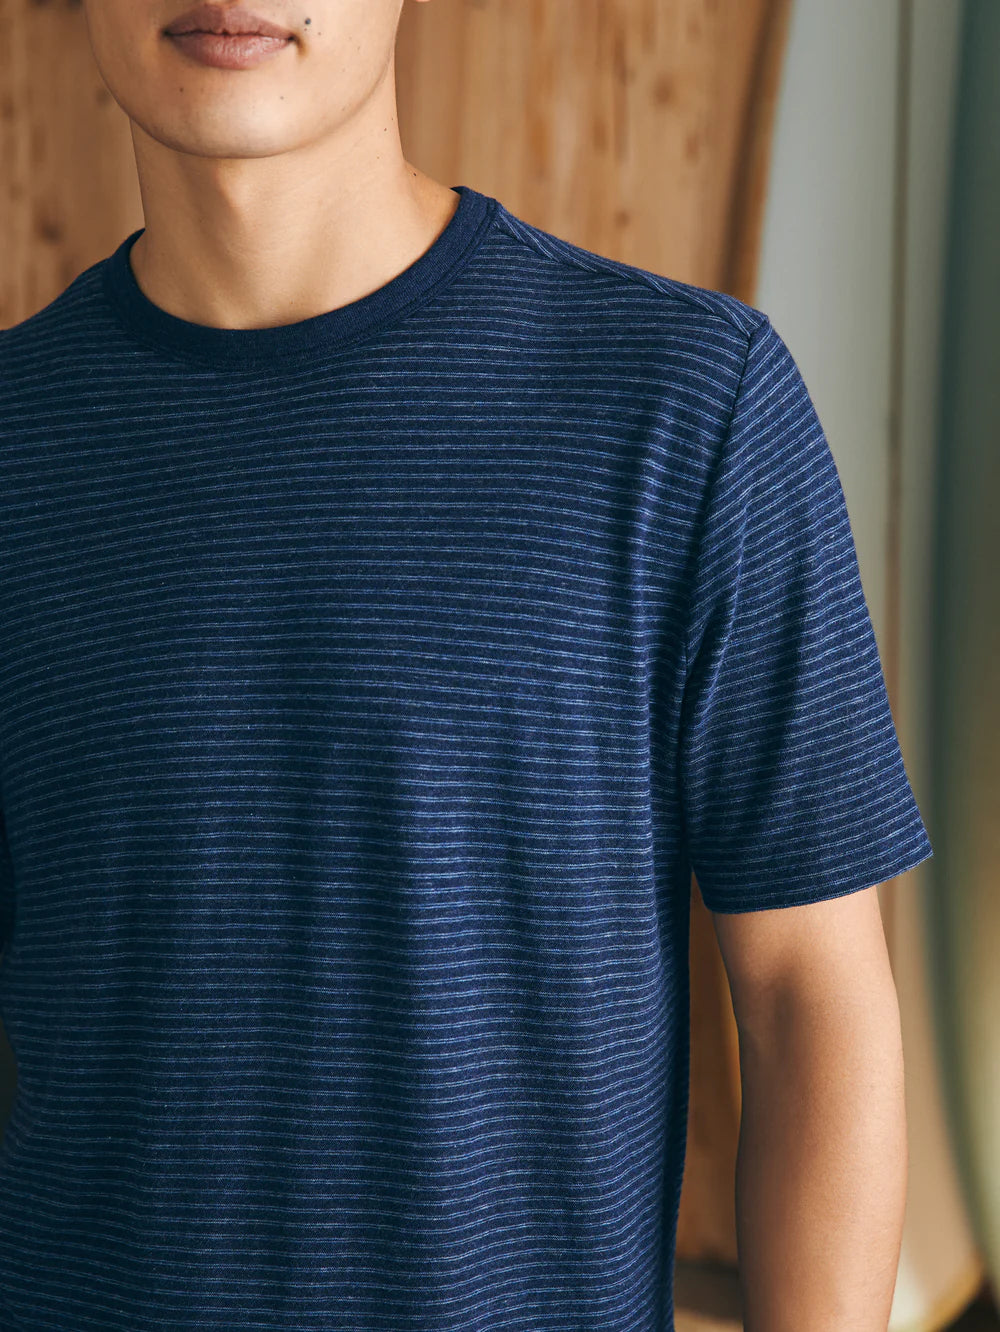 S/S VINTAGE CHAMBRAY TEE - NAVY COVE STRIPE